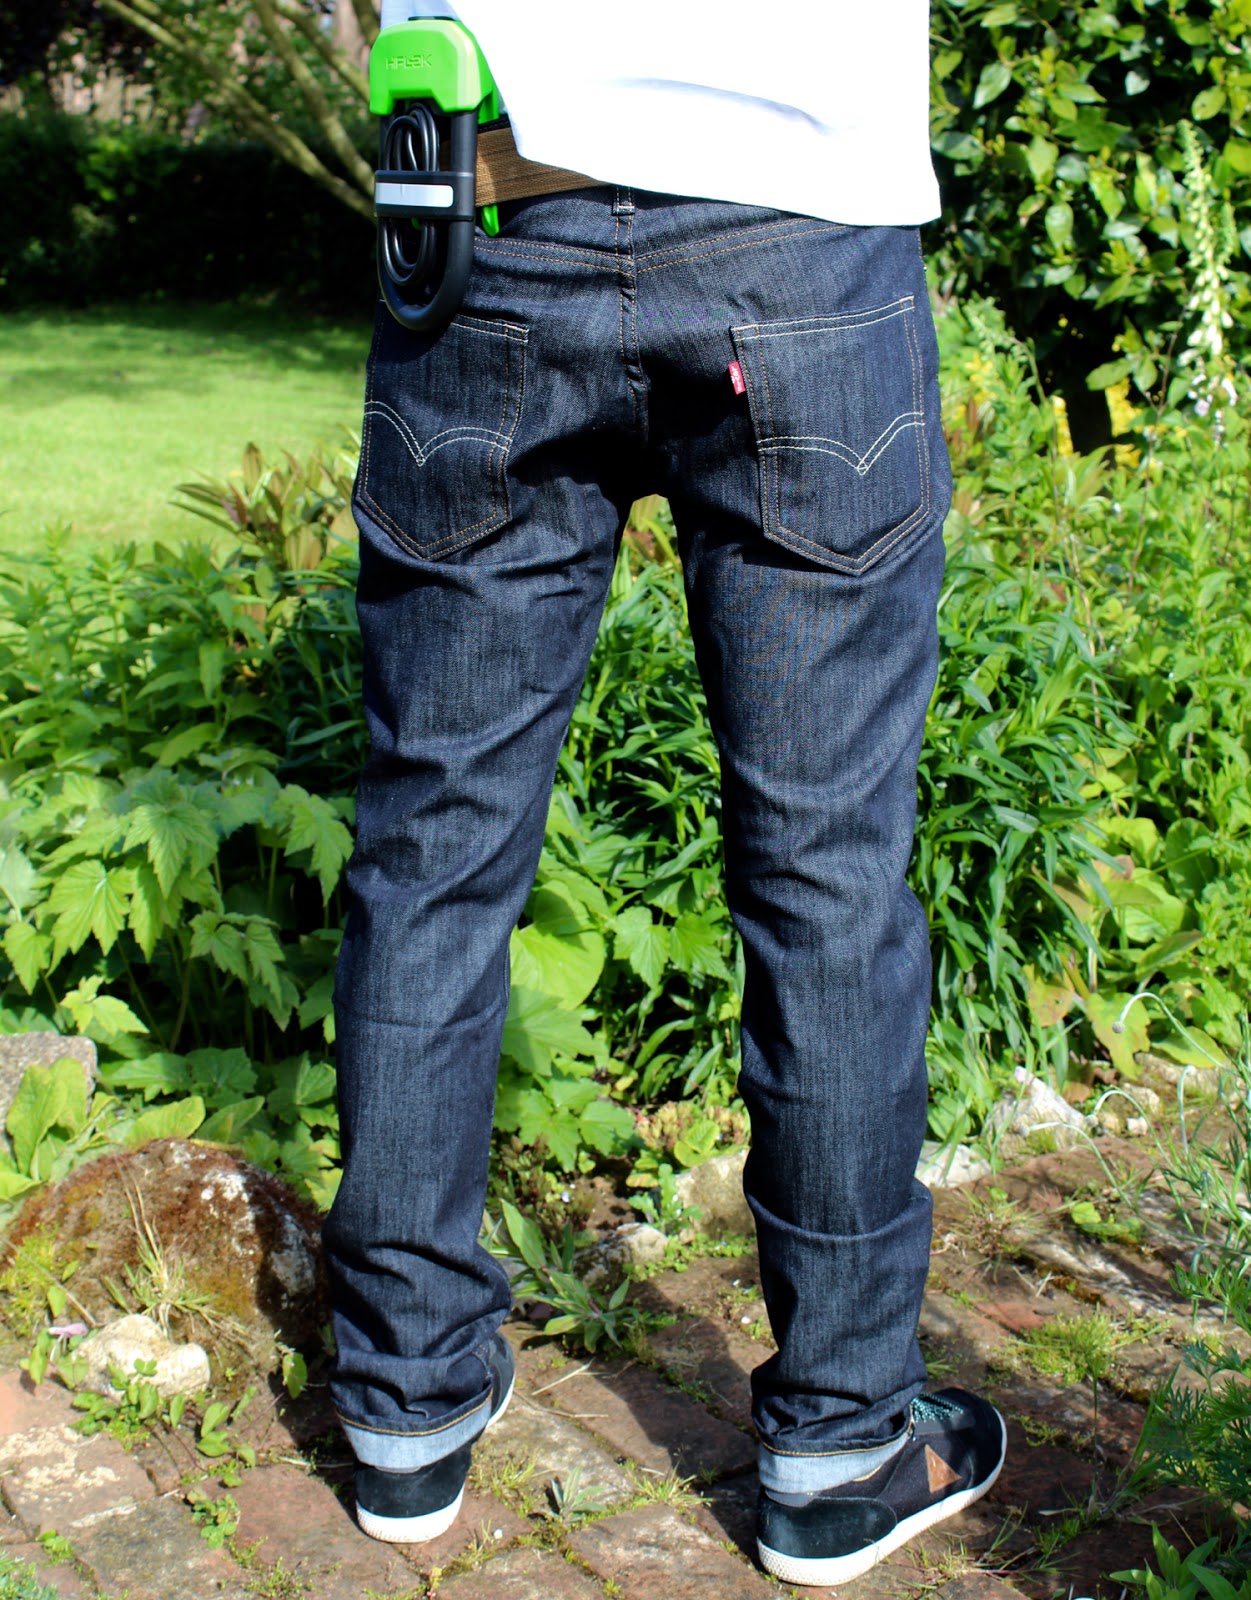 Review: Levi's 511 Slim Fit Commuter Jeans and Tee